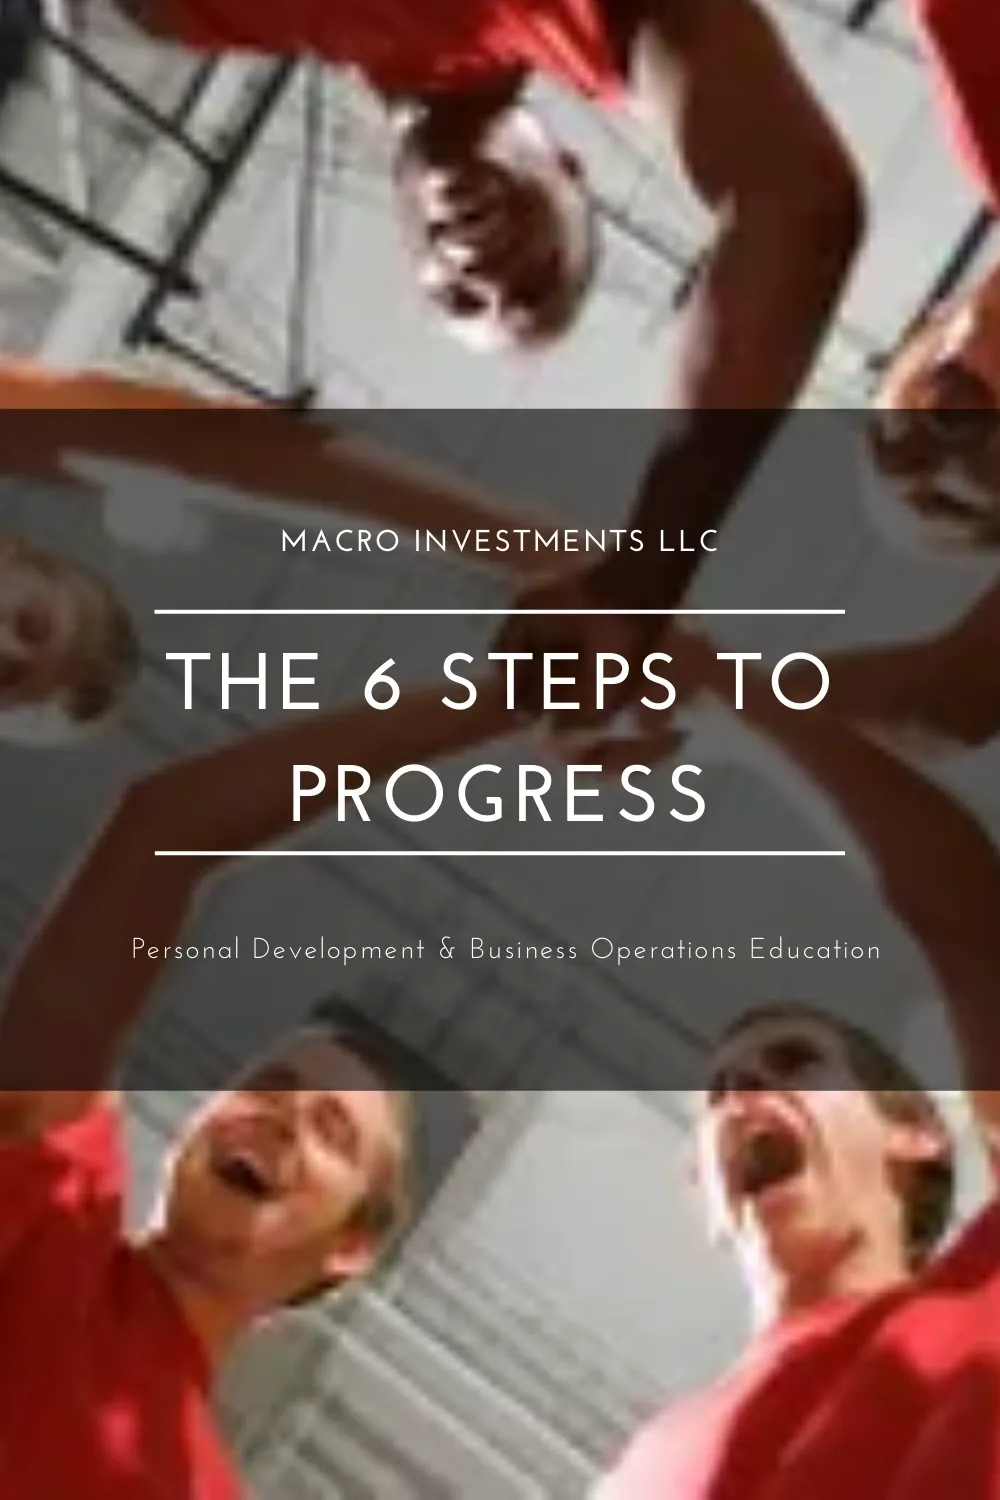 Learn 6 Ways to Help You Achieve Progress in Life | Blog | InvestingTE.com